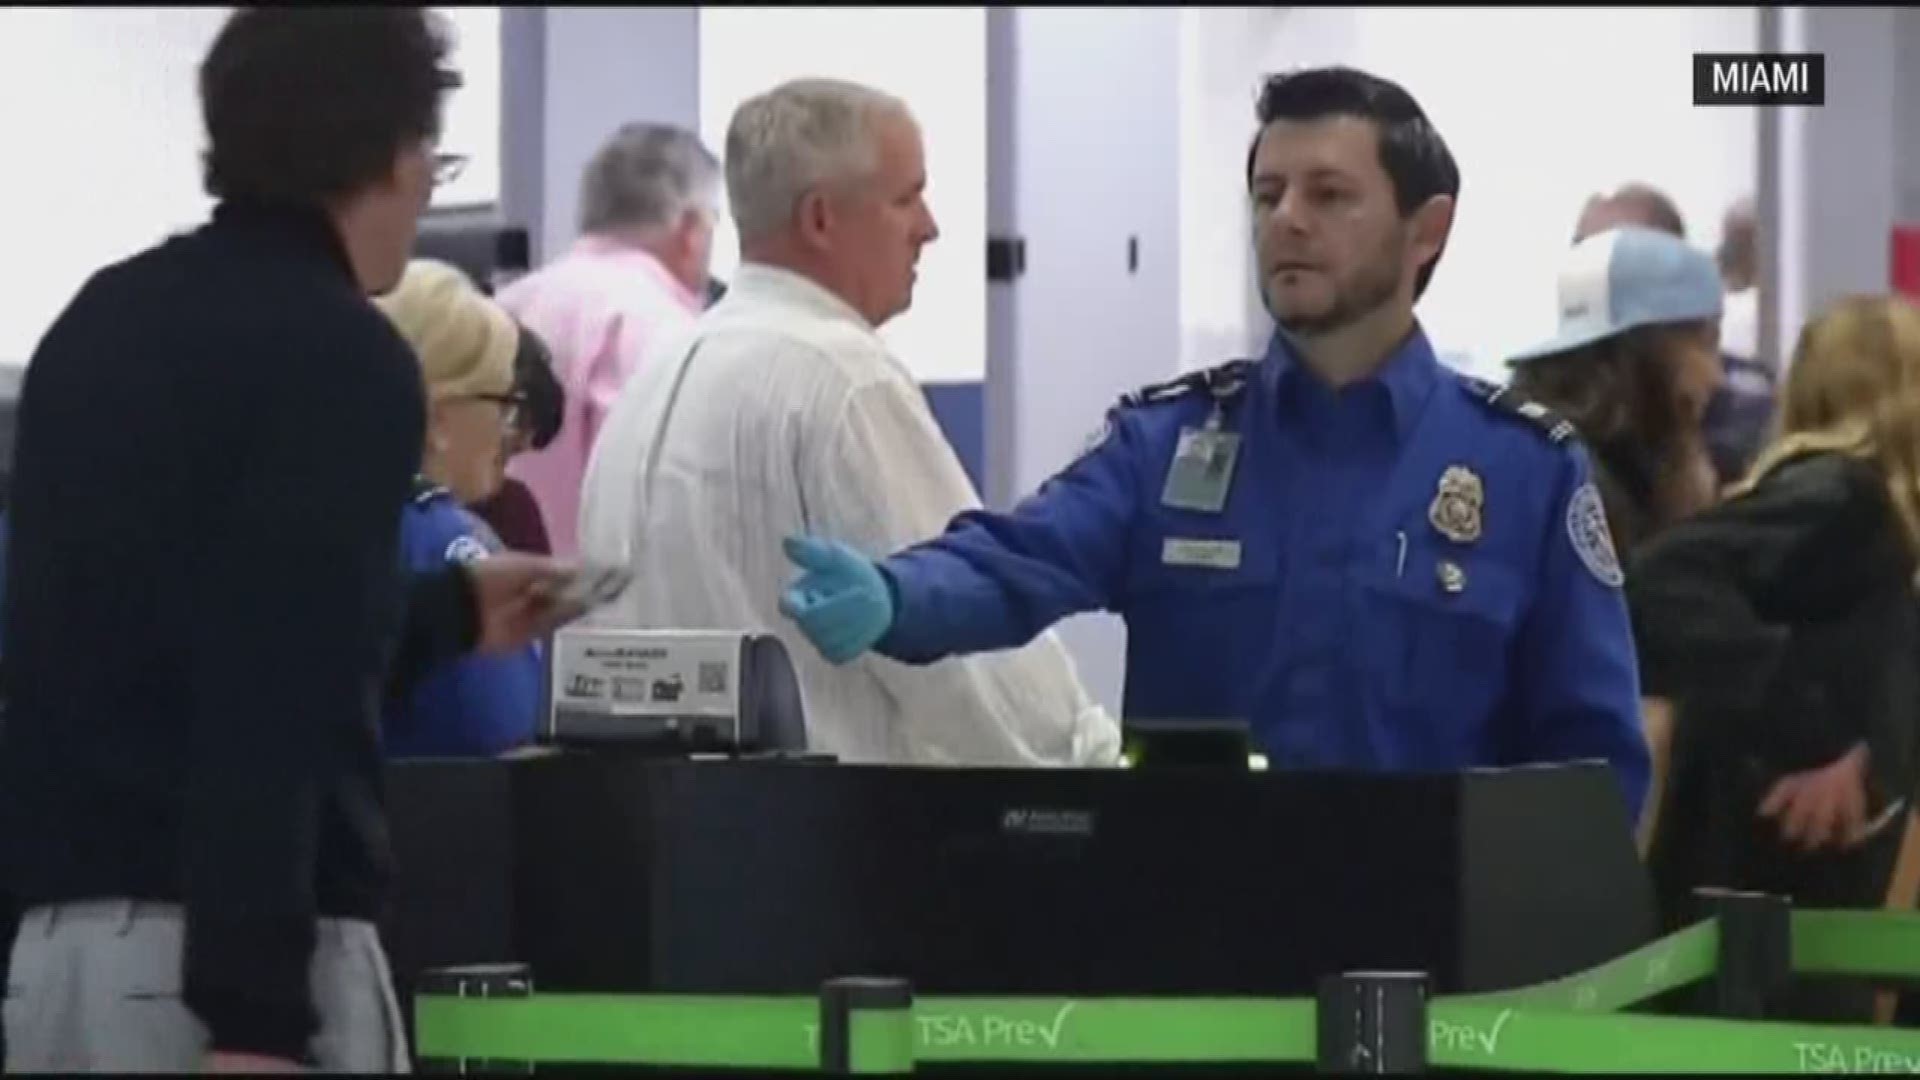 Security checkpoints are still running smoothly at Sea-Tac Airport, but people working some crucial roles in aviation are not getting paid, and they're nervous about how long this will drag on.